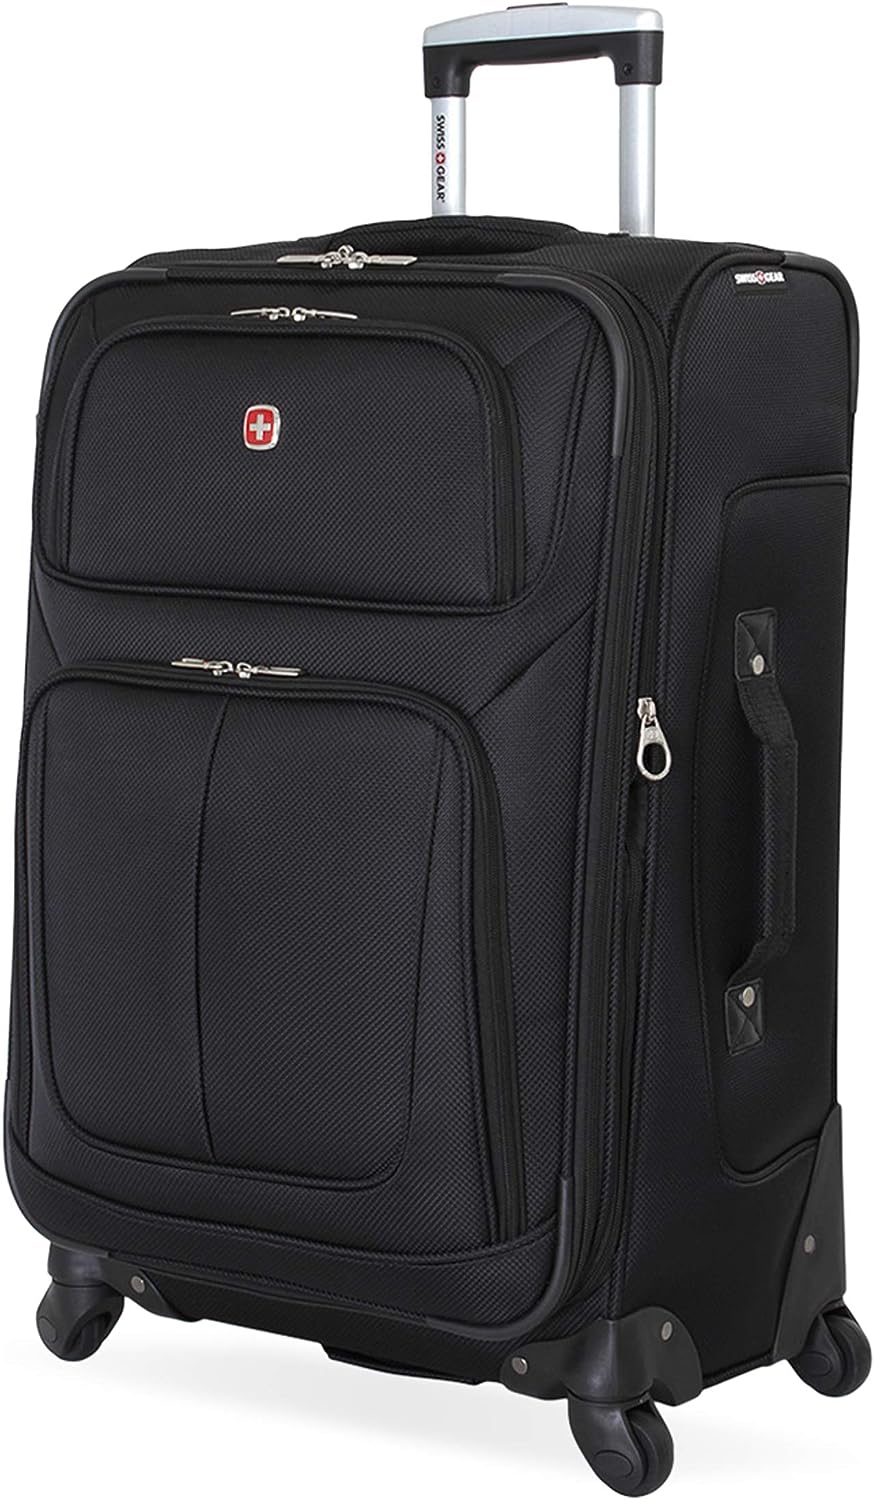 SwissGear Sion Softside Expandable Roller Luggage, Black, Checked-Medium 25-Inch 